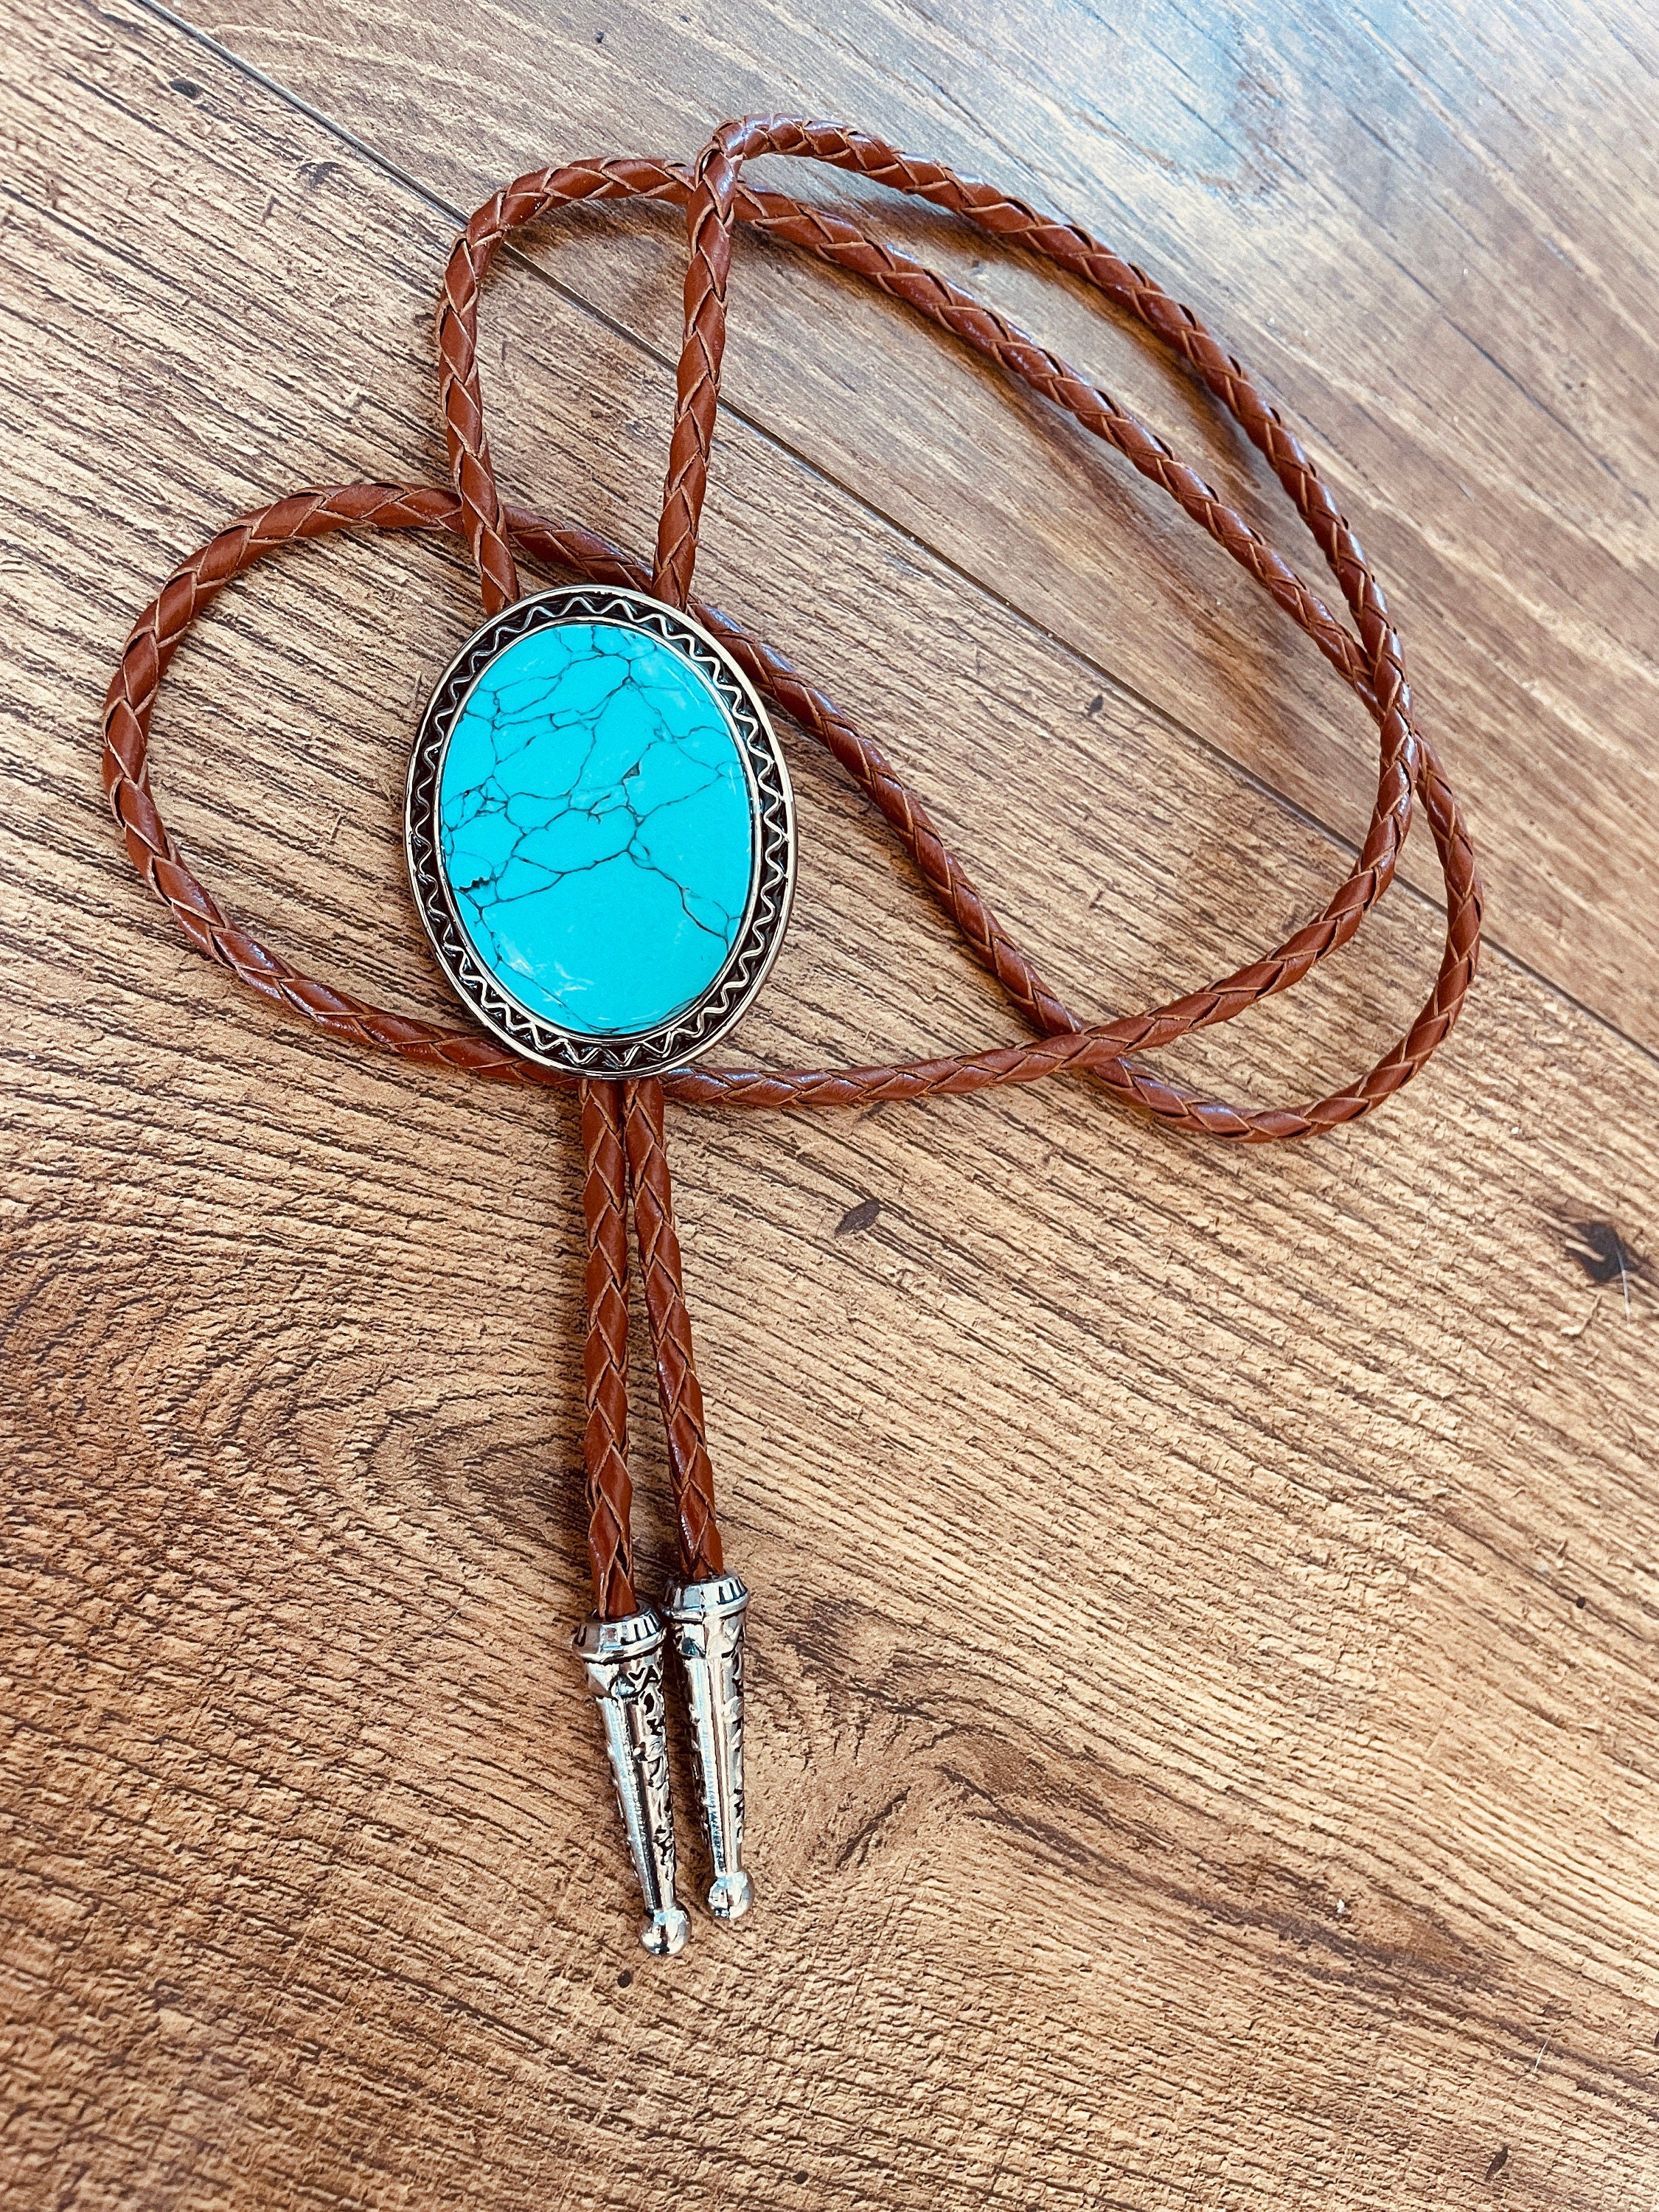 How to Make Awesome Bolo Ties At Home